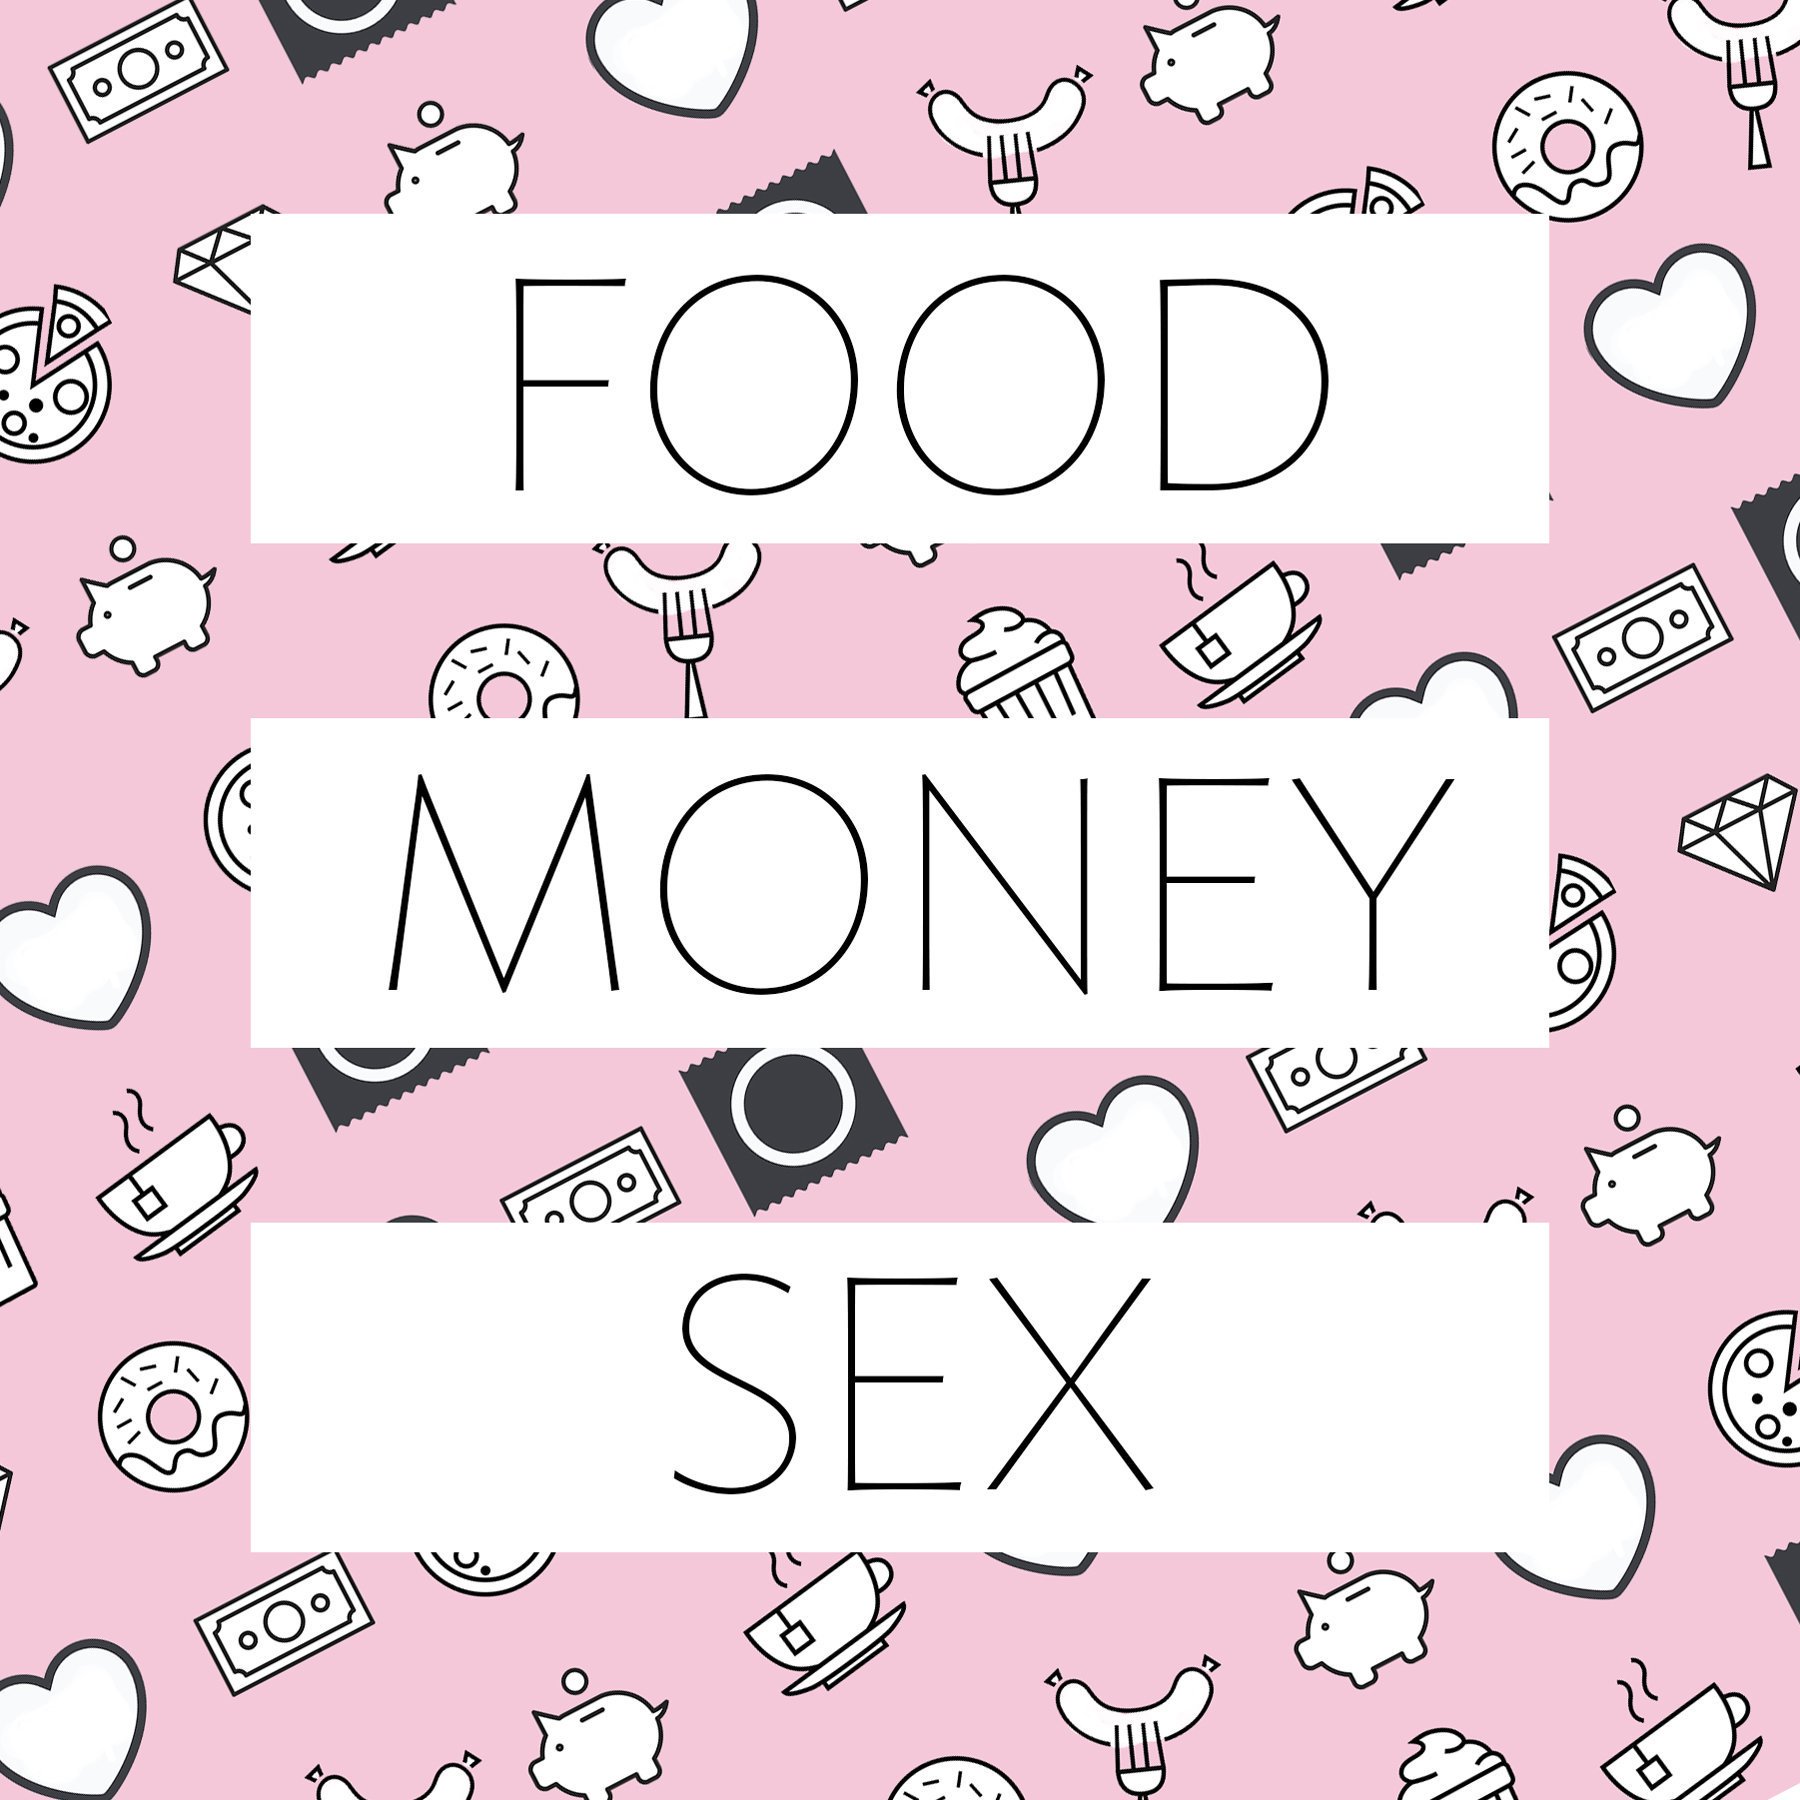 Food Money Sex A Think Tank Employee Who Watches Porn With His Girlfriend and Believes “That Food Doesnt Go Bad”